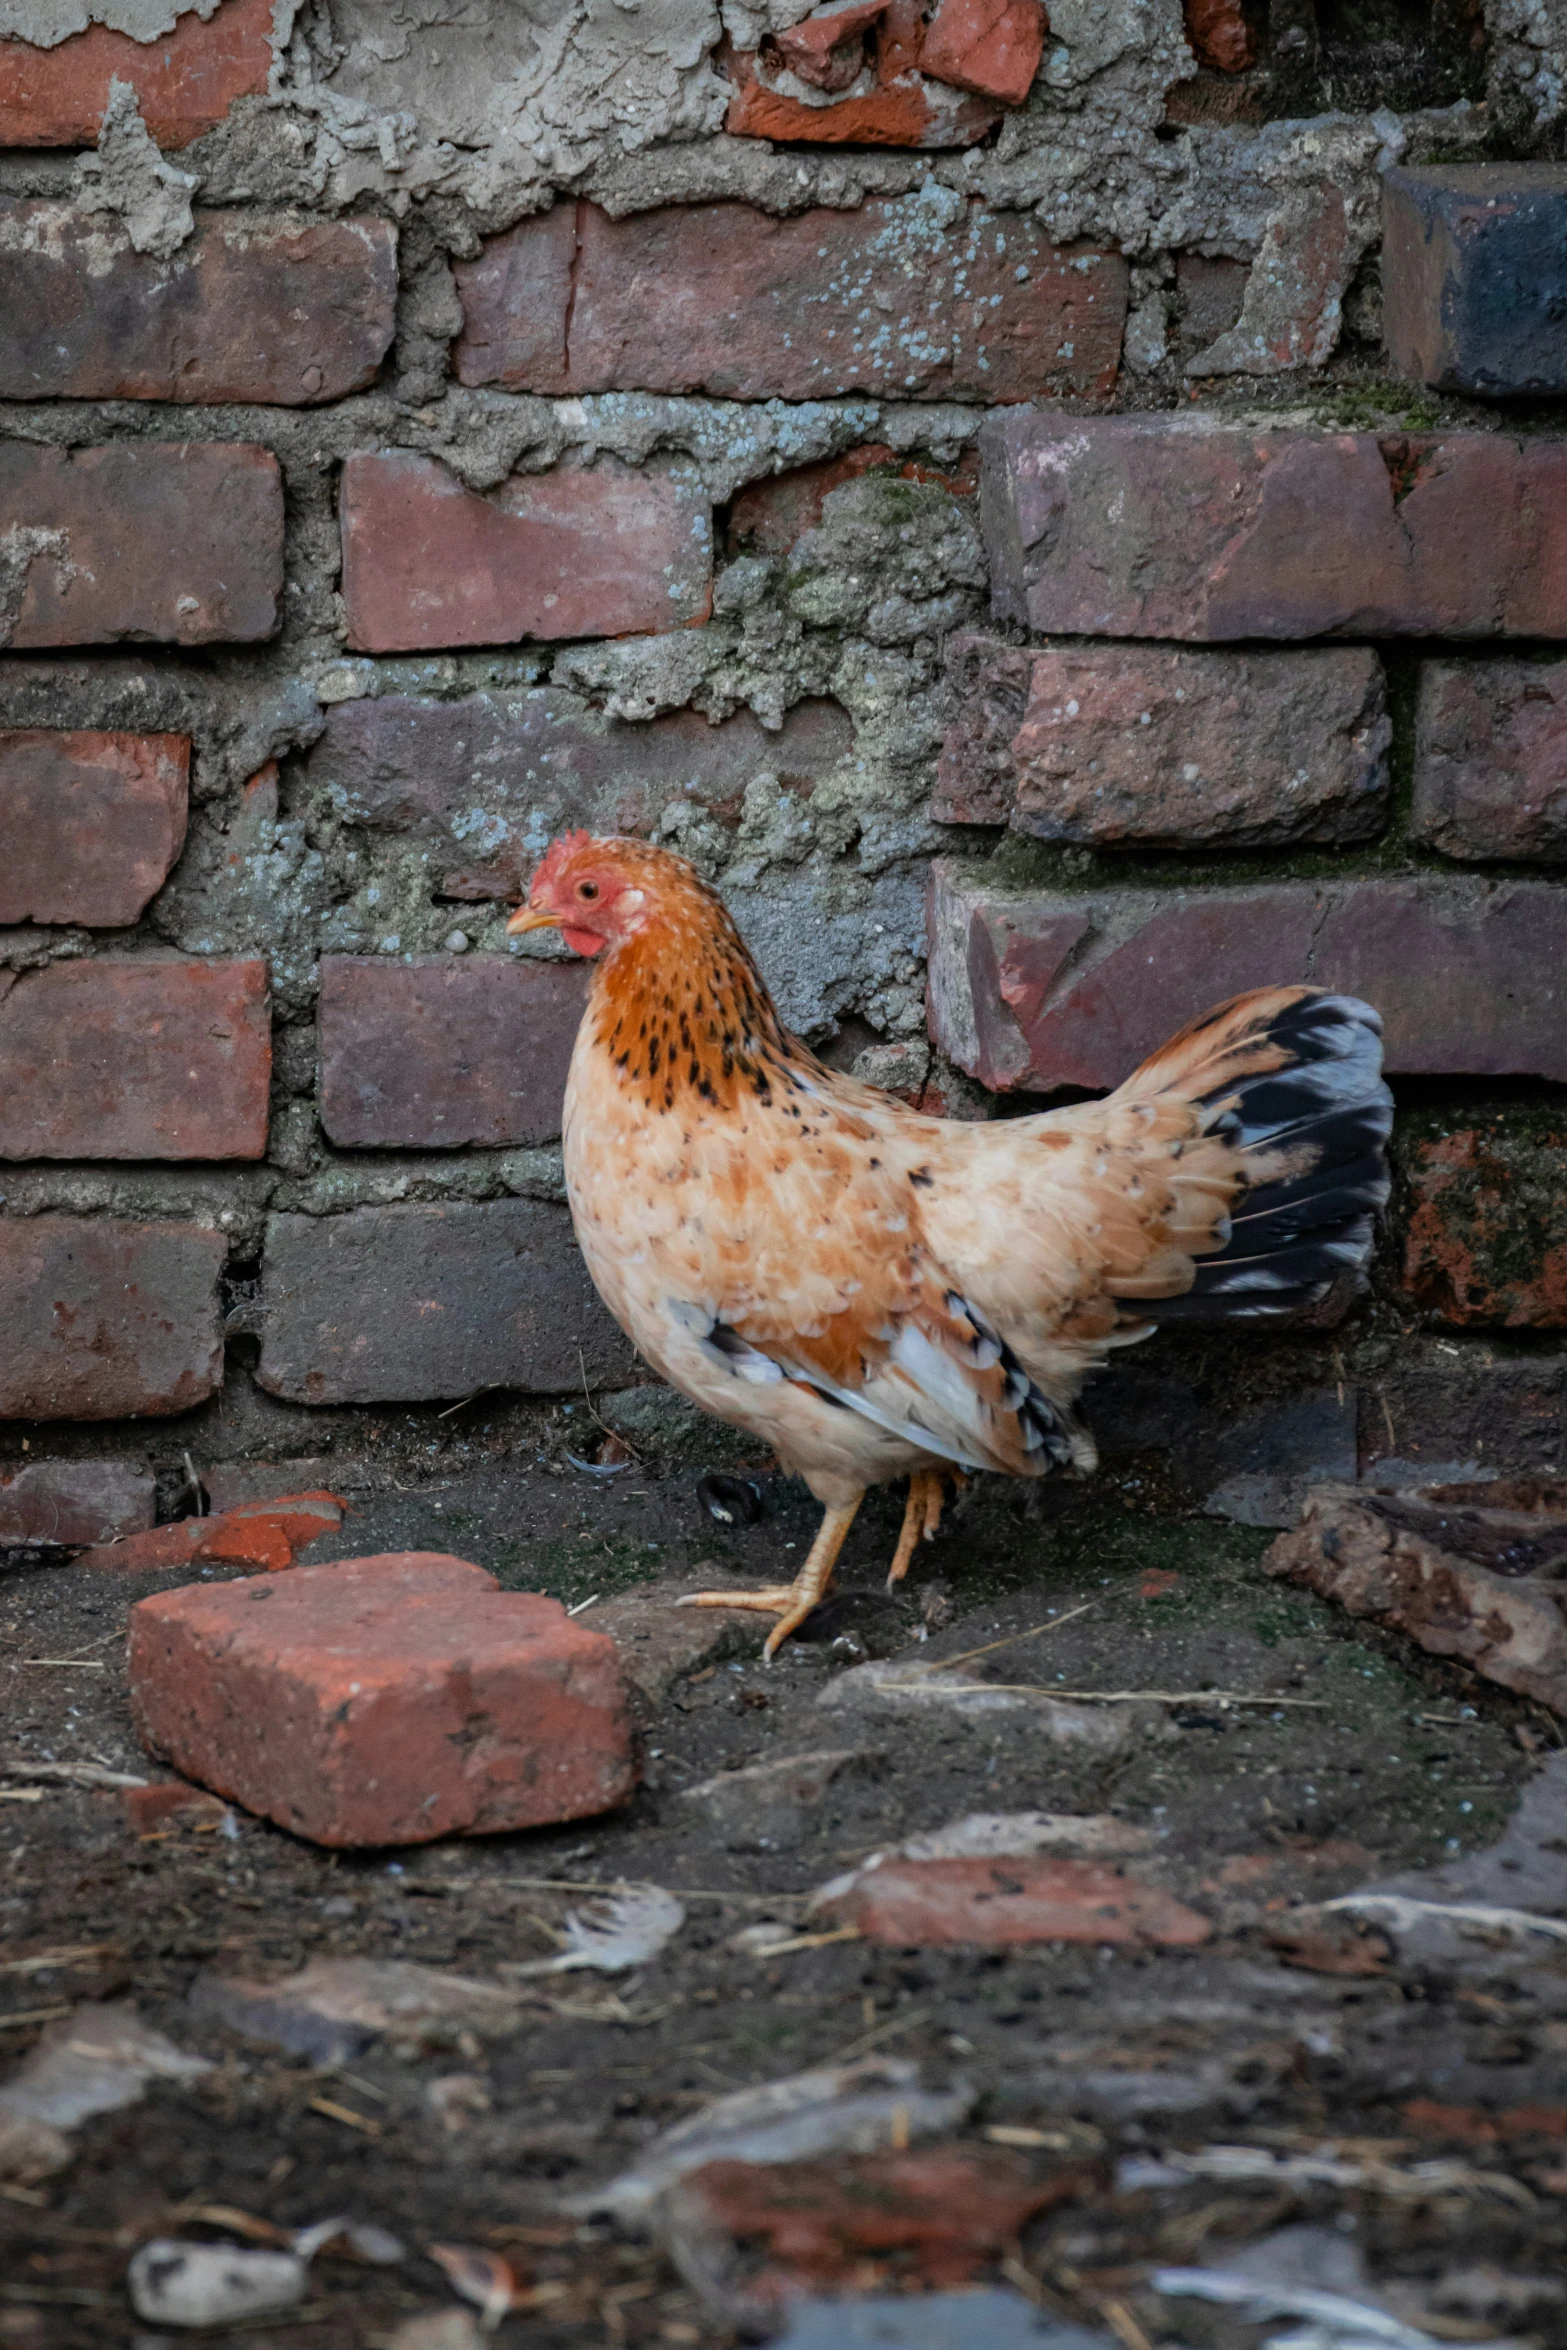 a rooster walking around next to a brick wall